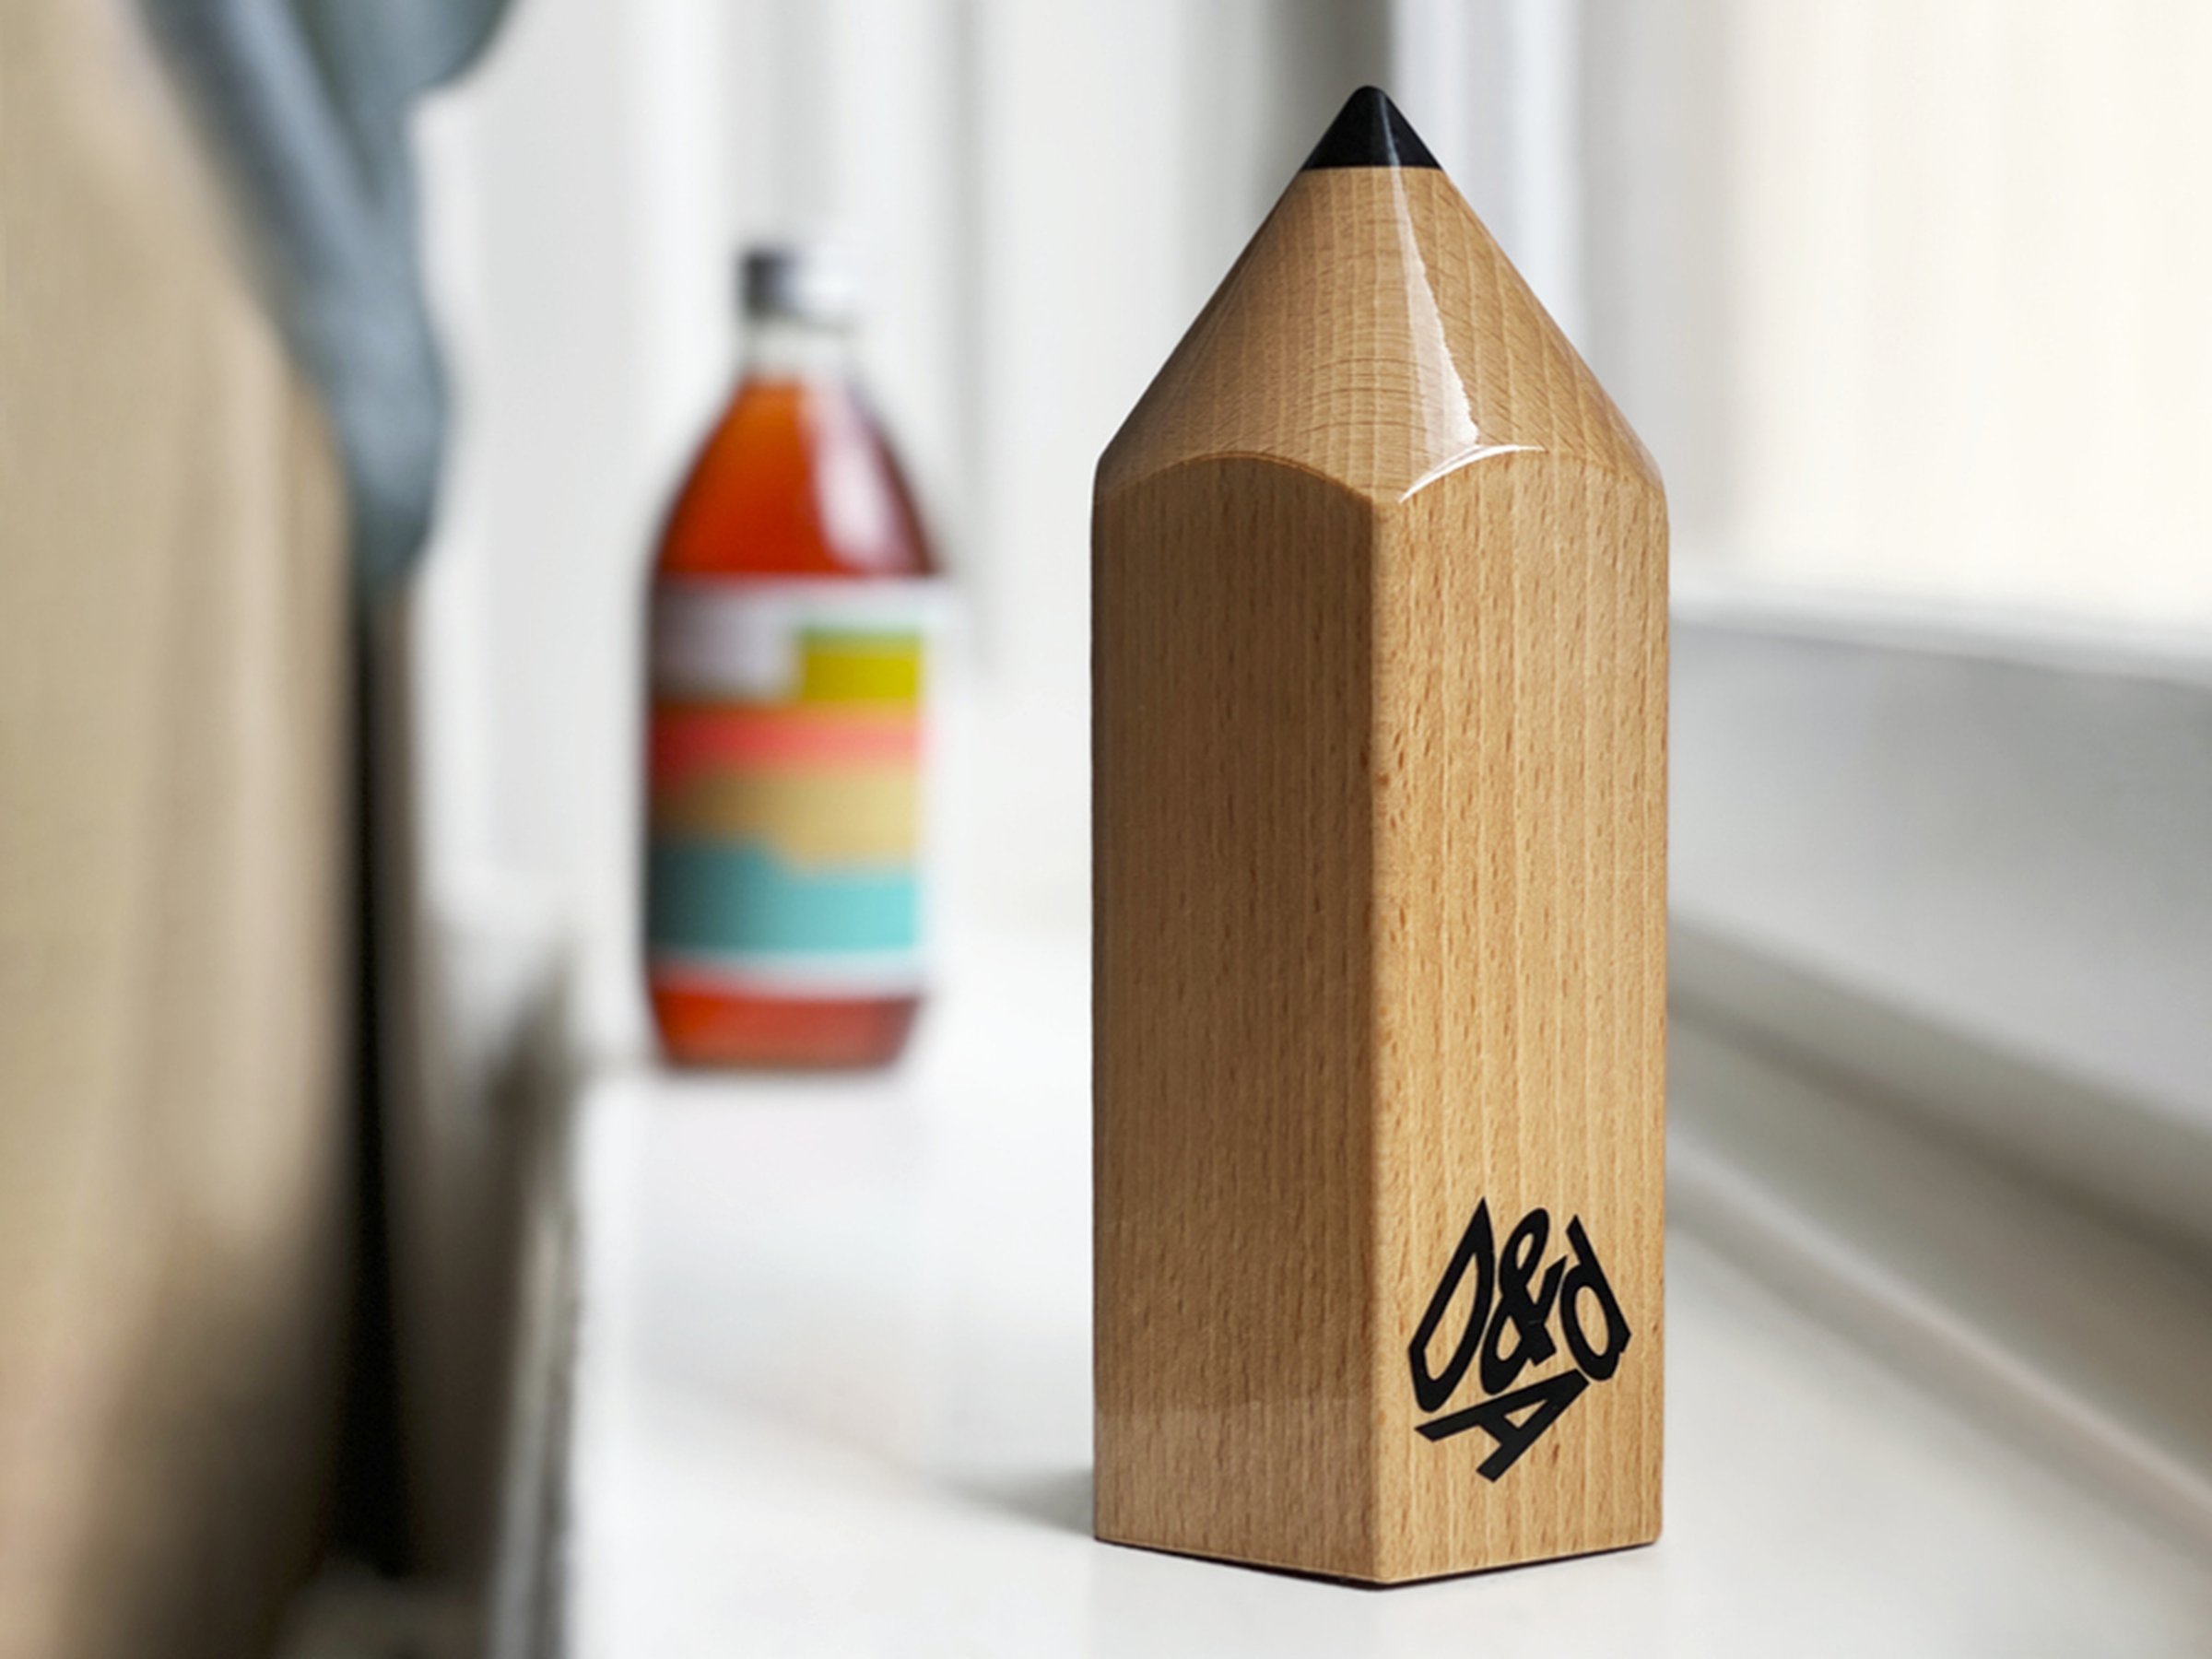 Bedow awarded a wooden pencil in D&AD Awards